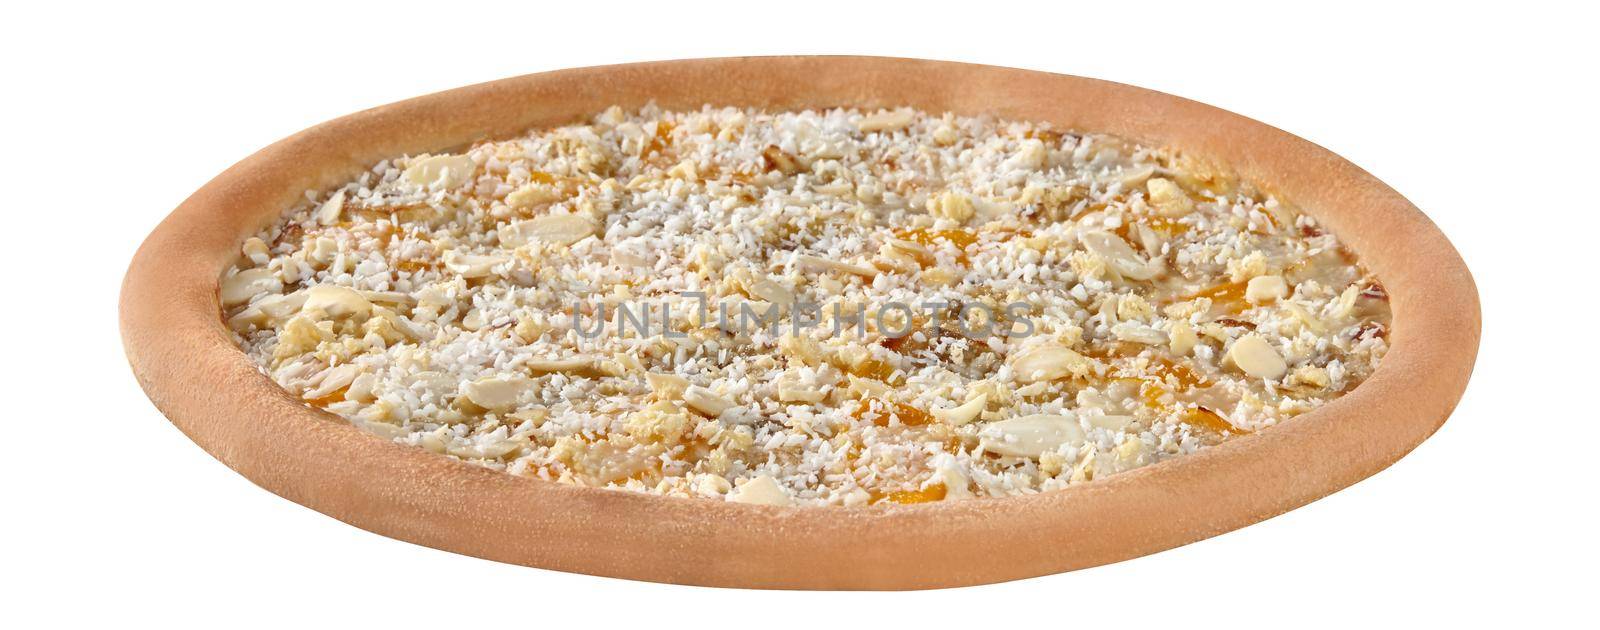 Sweet pizza with condensed milk, banana, peach, coconut shavings and almond flakes by nazarovsergey